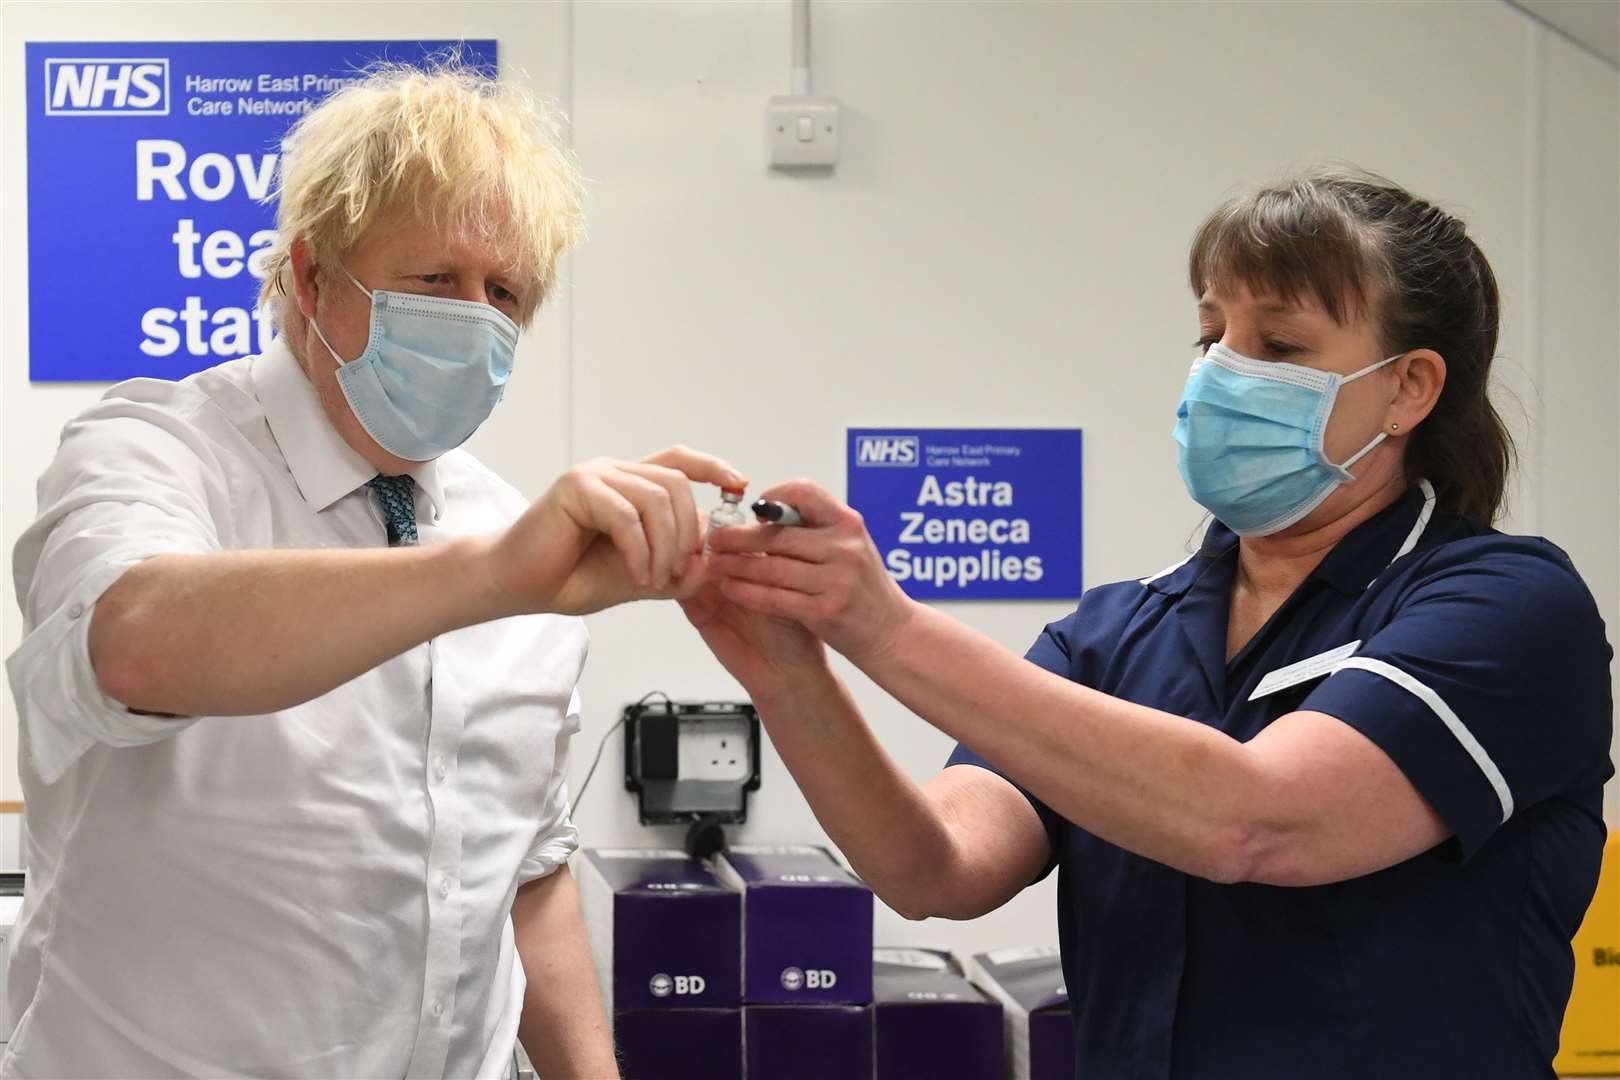 Prime Minister Boris Johnson is shown a vial of the Oxford/AstraZeneca coronavirus vaccine during a visit to Barnet FC’s ground at The Hive, north London, which is being used as a coronavirus vaccination centre (Stefan Rousseau/PA)